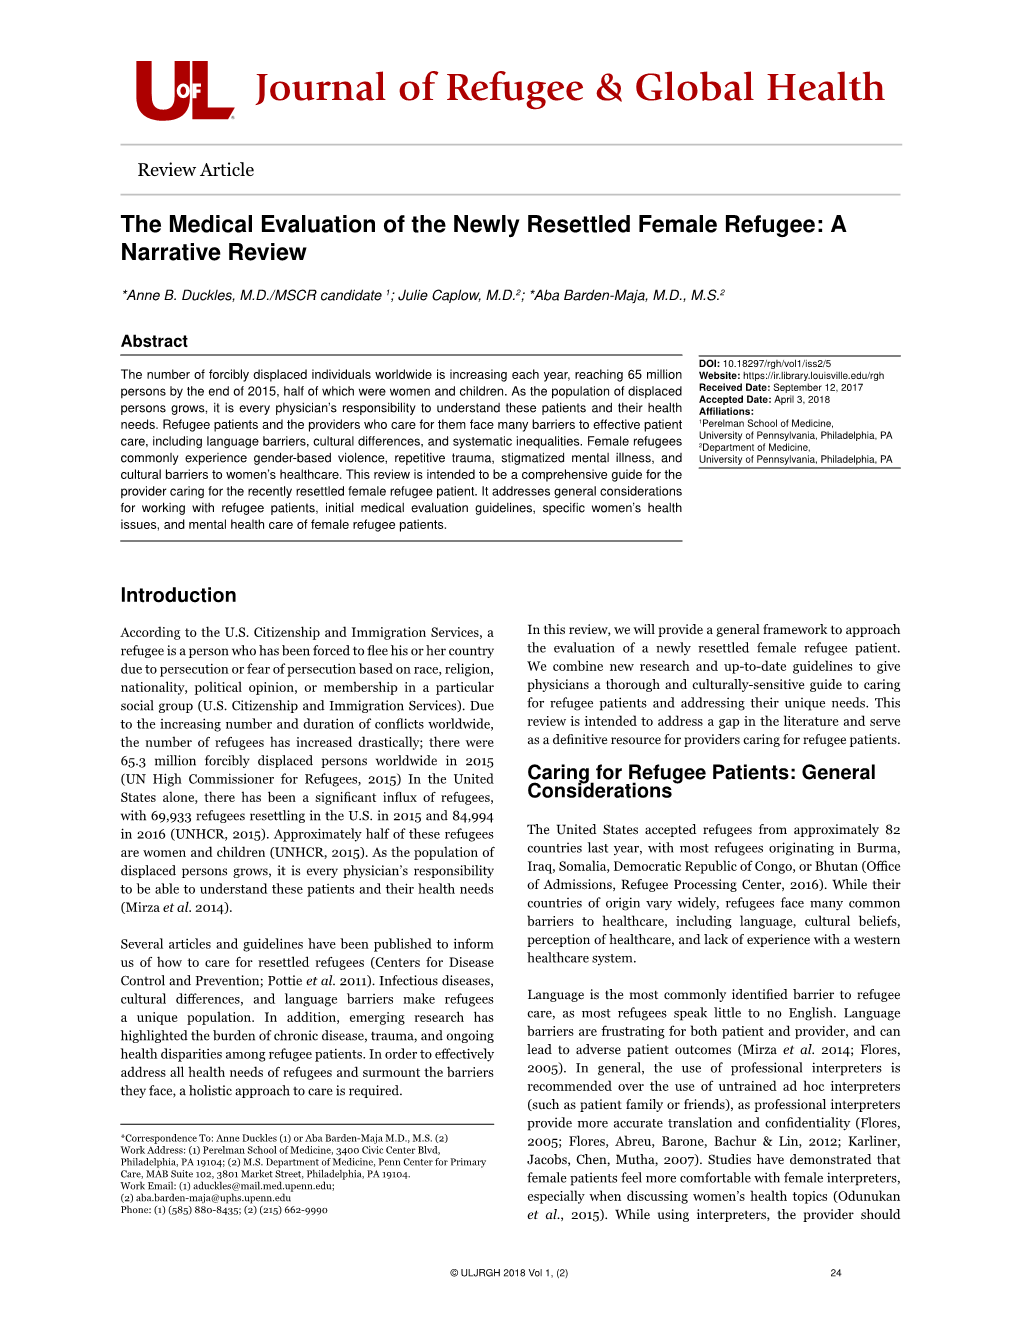 The Medical Evaluation of the Newly Resettled Female Refugee: a Narrative Review